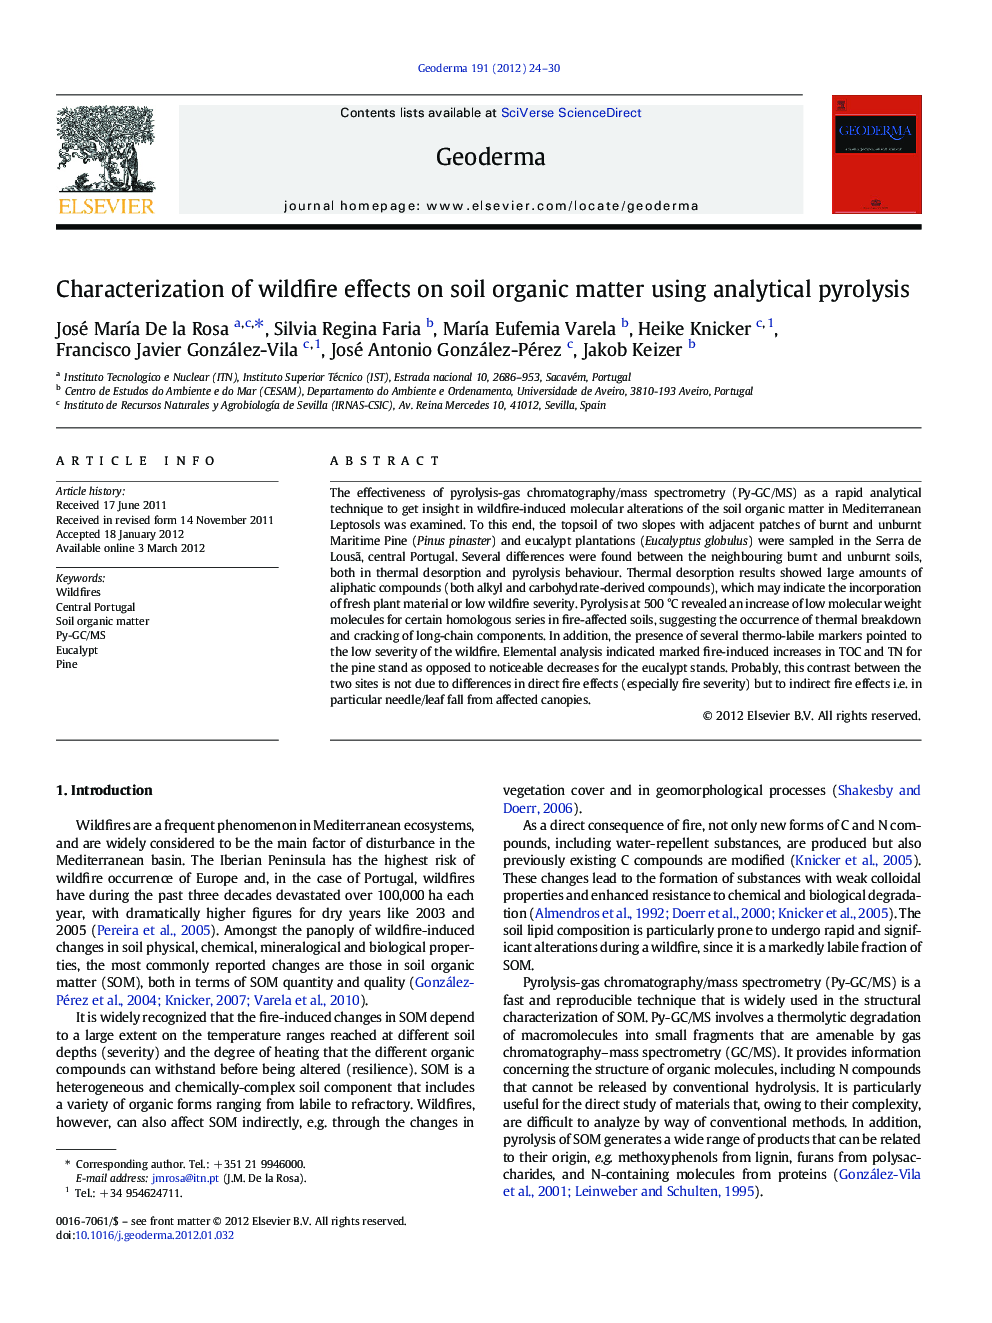 Characterization of wildfire effects on soil organic matter using analytical pyrolysis